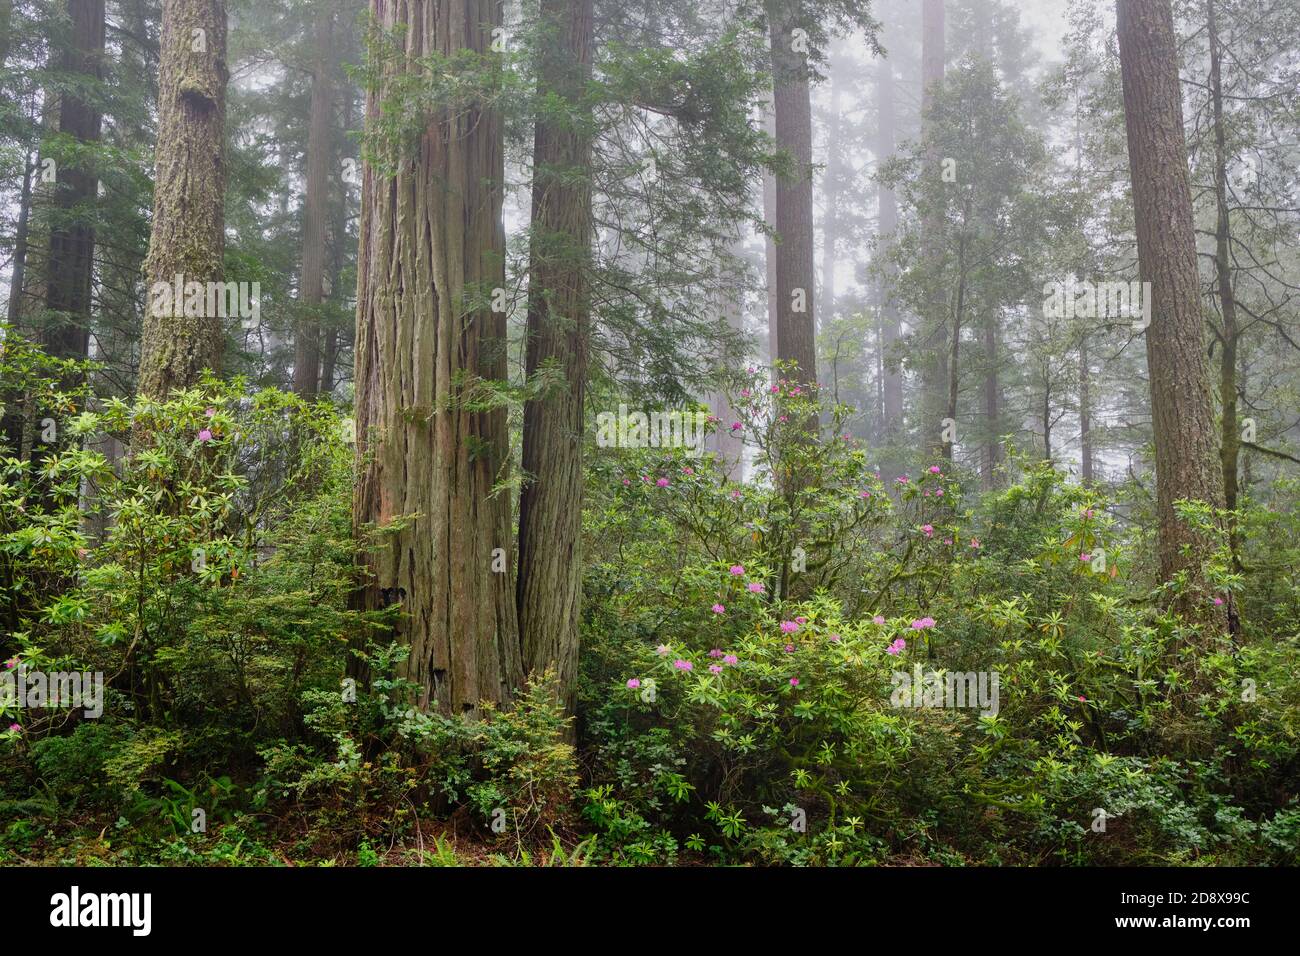 Foggy day in Del Norte Coast Redwoods State Park and blooming pink rhododendrons brighten the forest Stock Photo